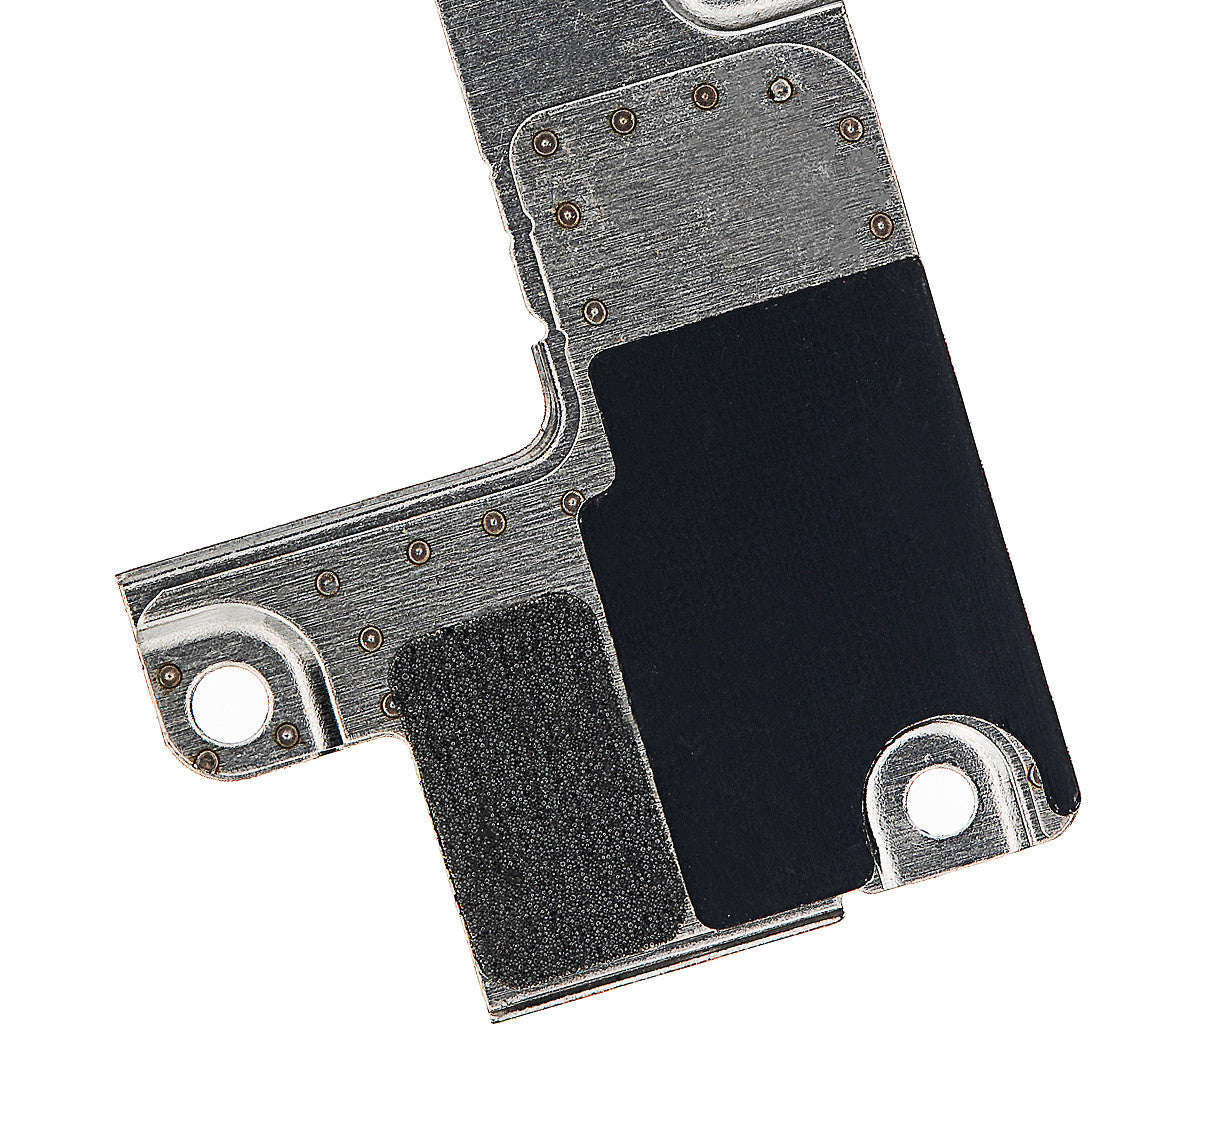 LCD / BATTERY CABLE HOLDING BRACKET COMPATIBLE WITH IPHONE 7 PLUS